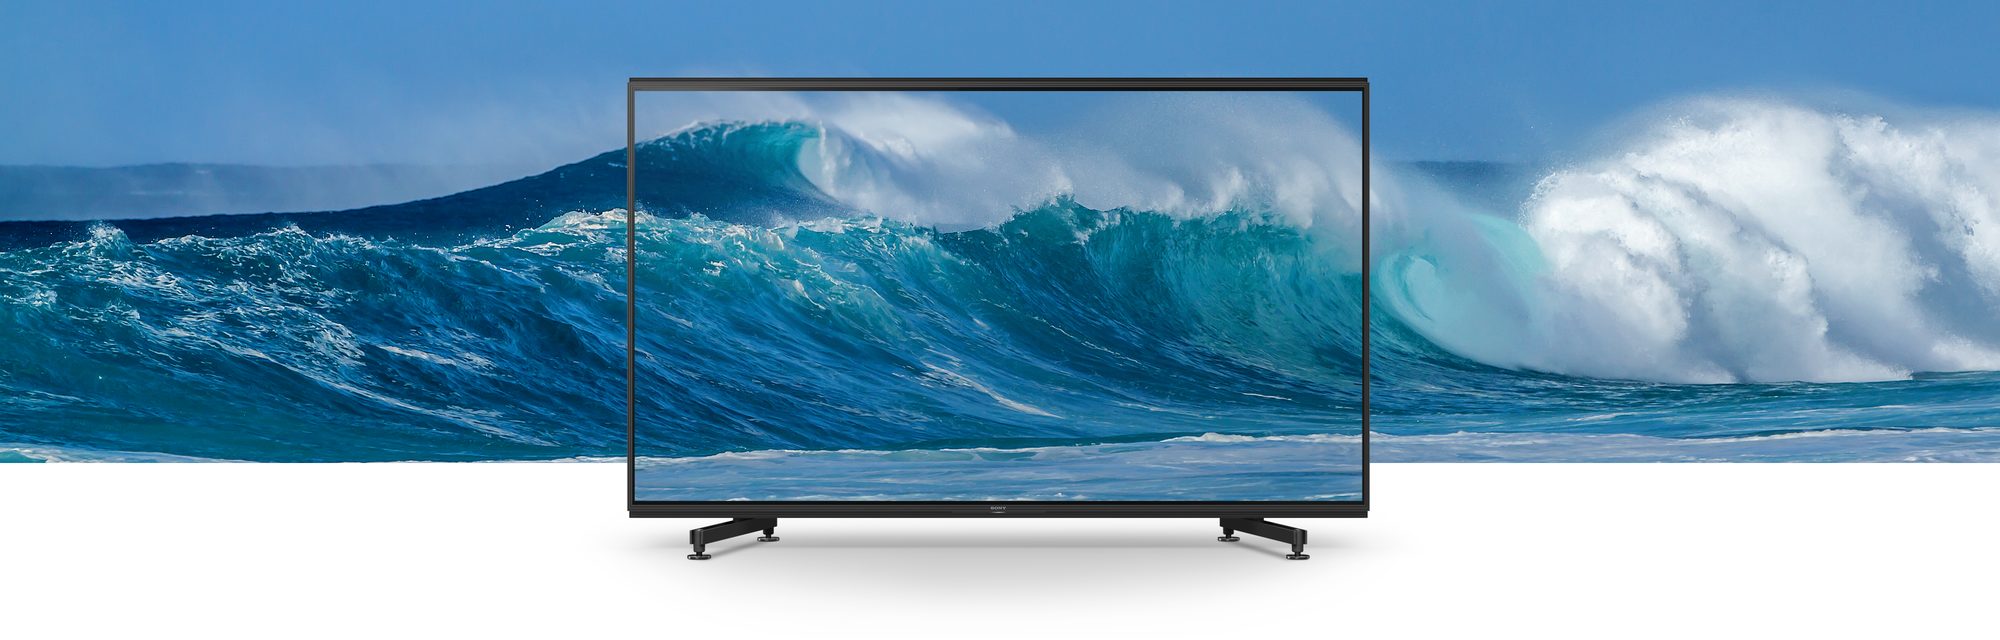 Sony Bravia Kd-65x8500d Led 4k Tv Vs Features